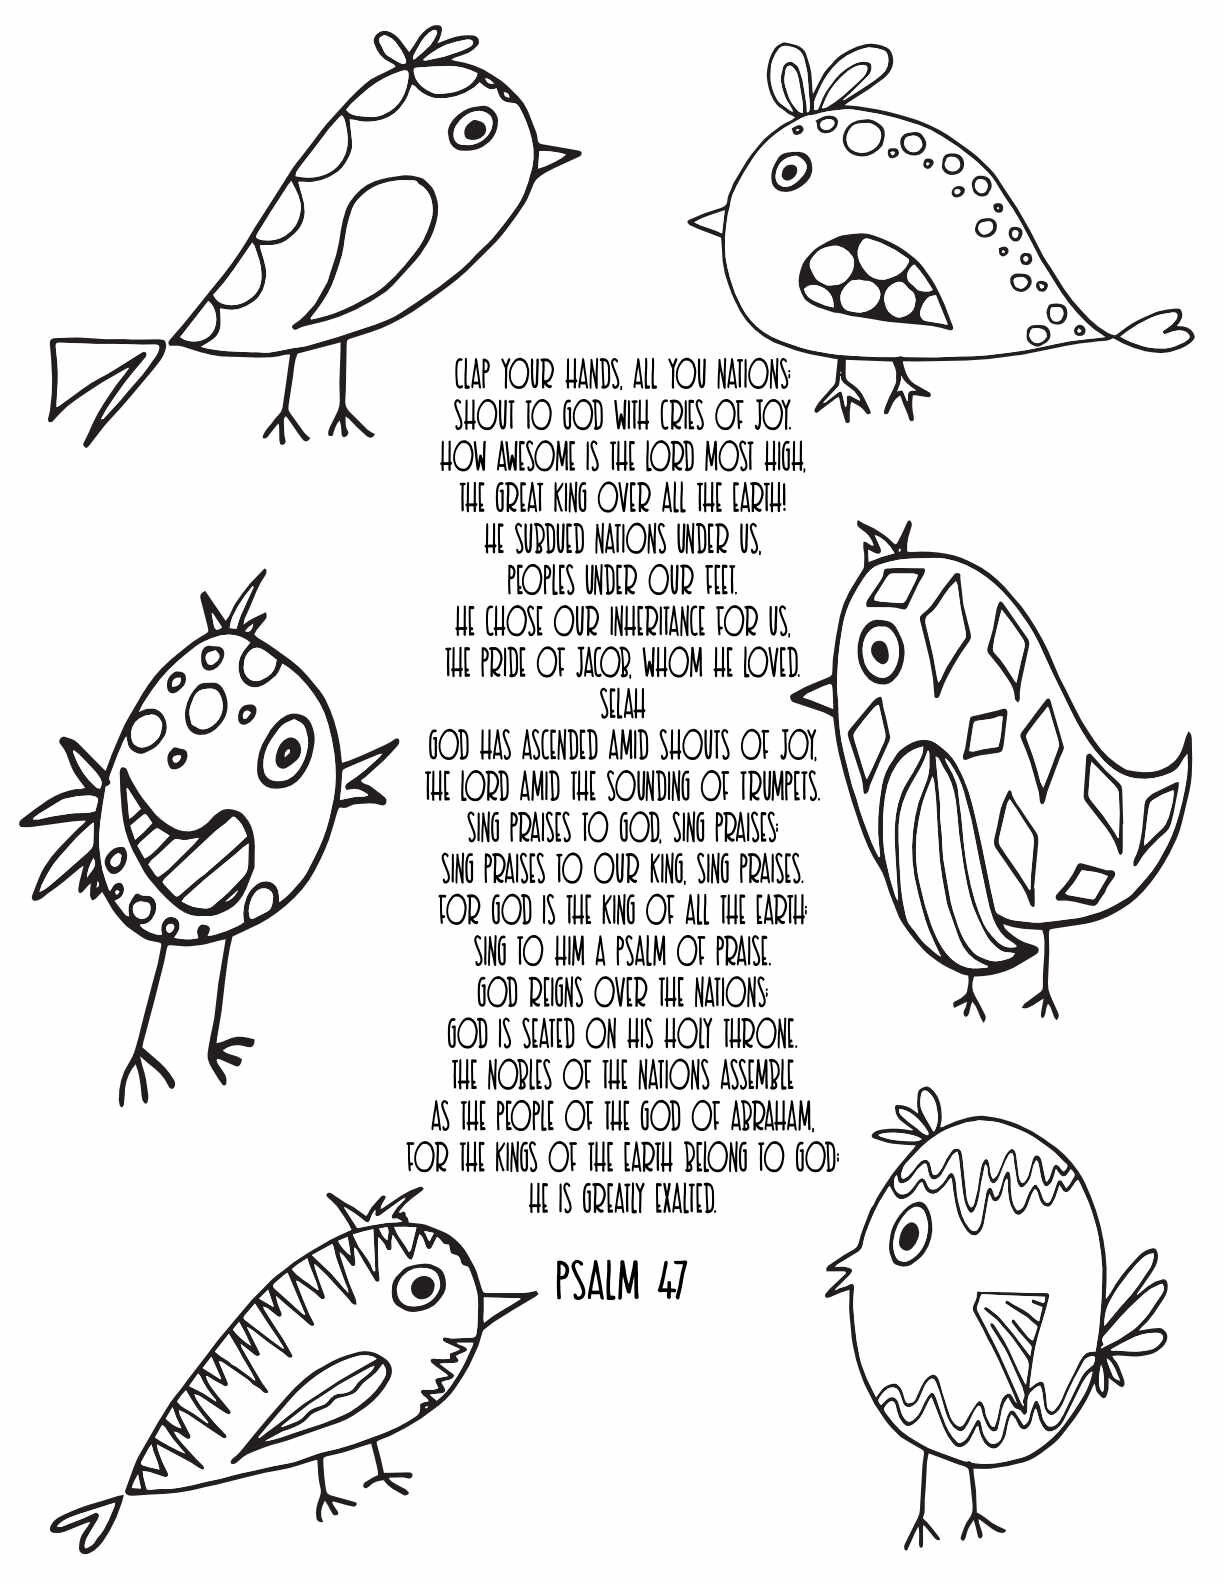 10 Free Printable Psalm Coloring Pages - Download and Color Adult Scripture - Psalm 47 CLICK HERE TO DOWNLOAD THIS PAGE FREE